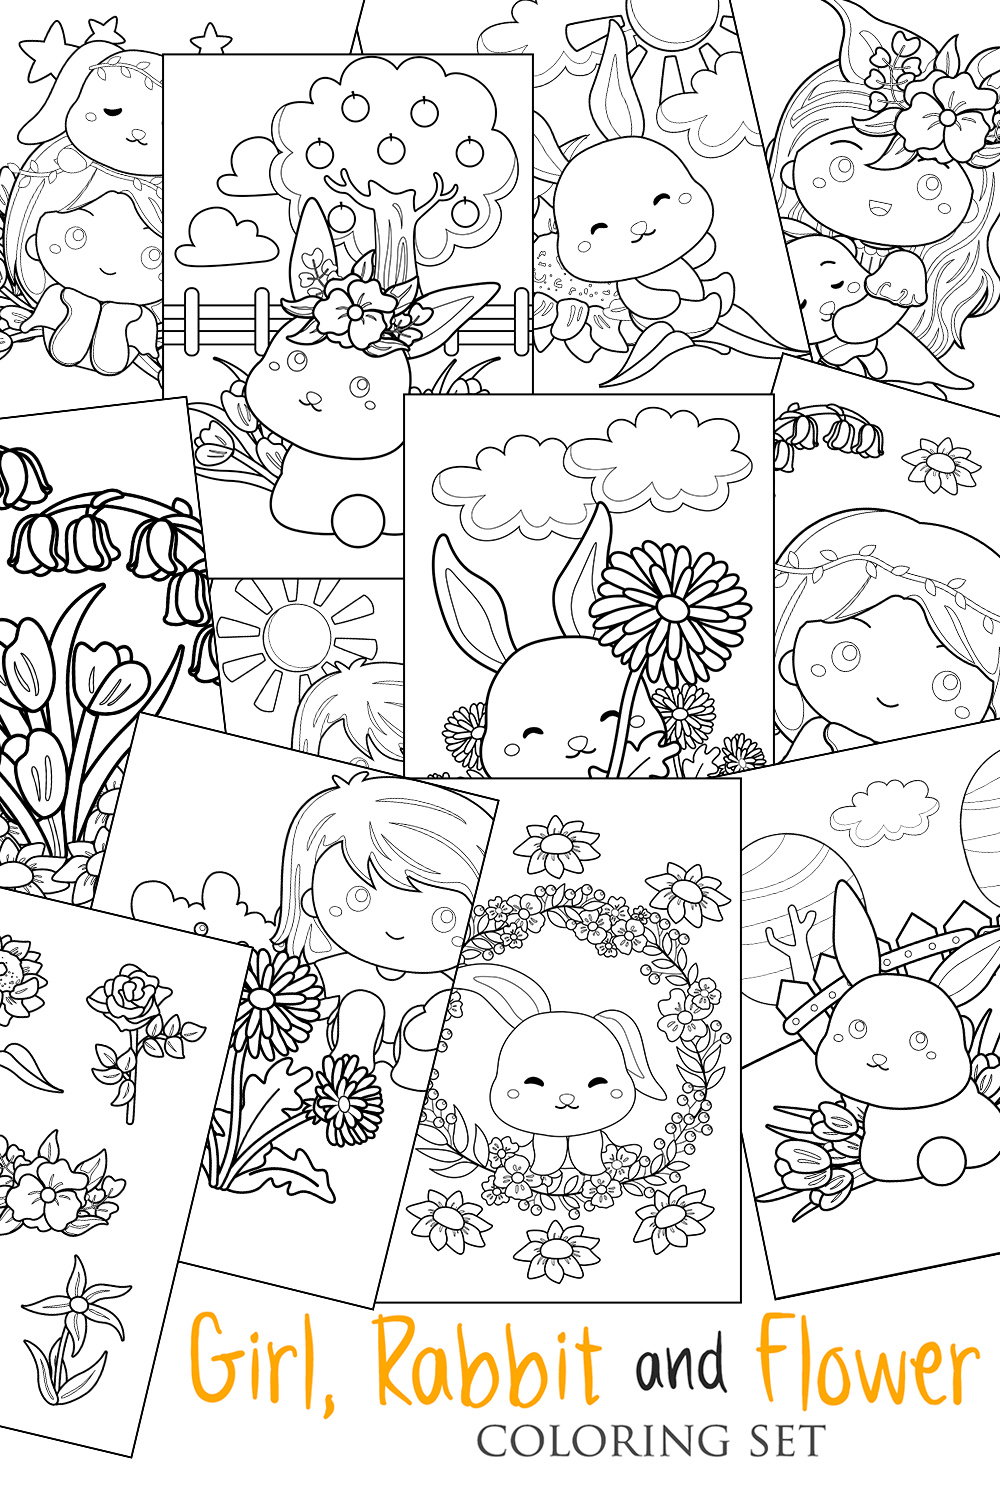 Girl Rabbit Flower Animal Cute Coloring Pages Activity For Kids And Adult pinterest preview image.